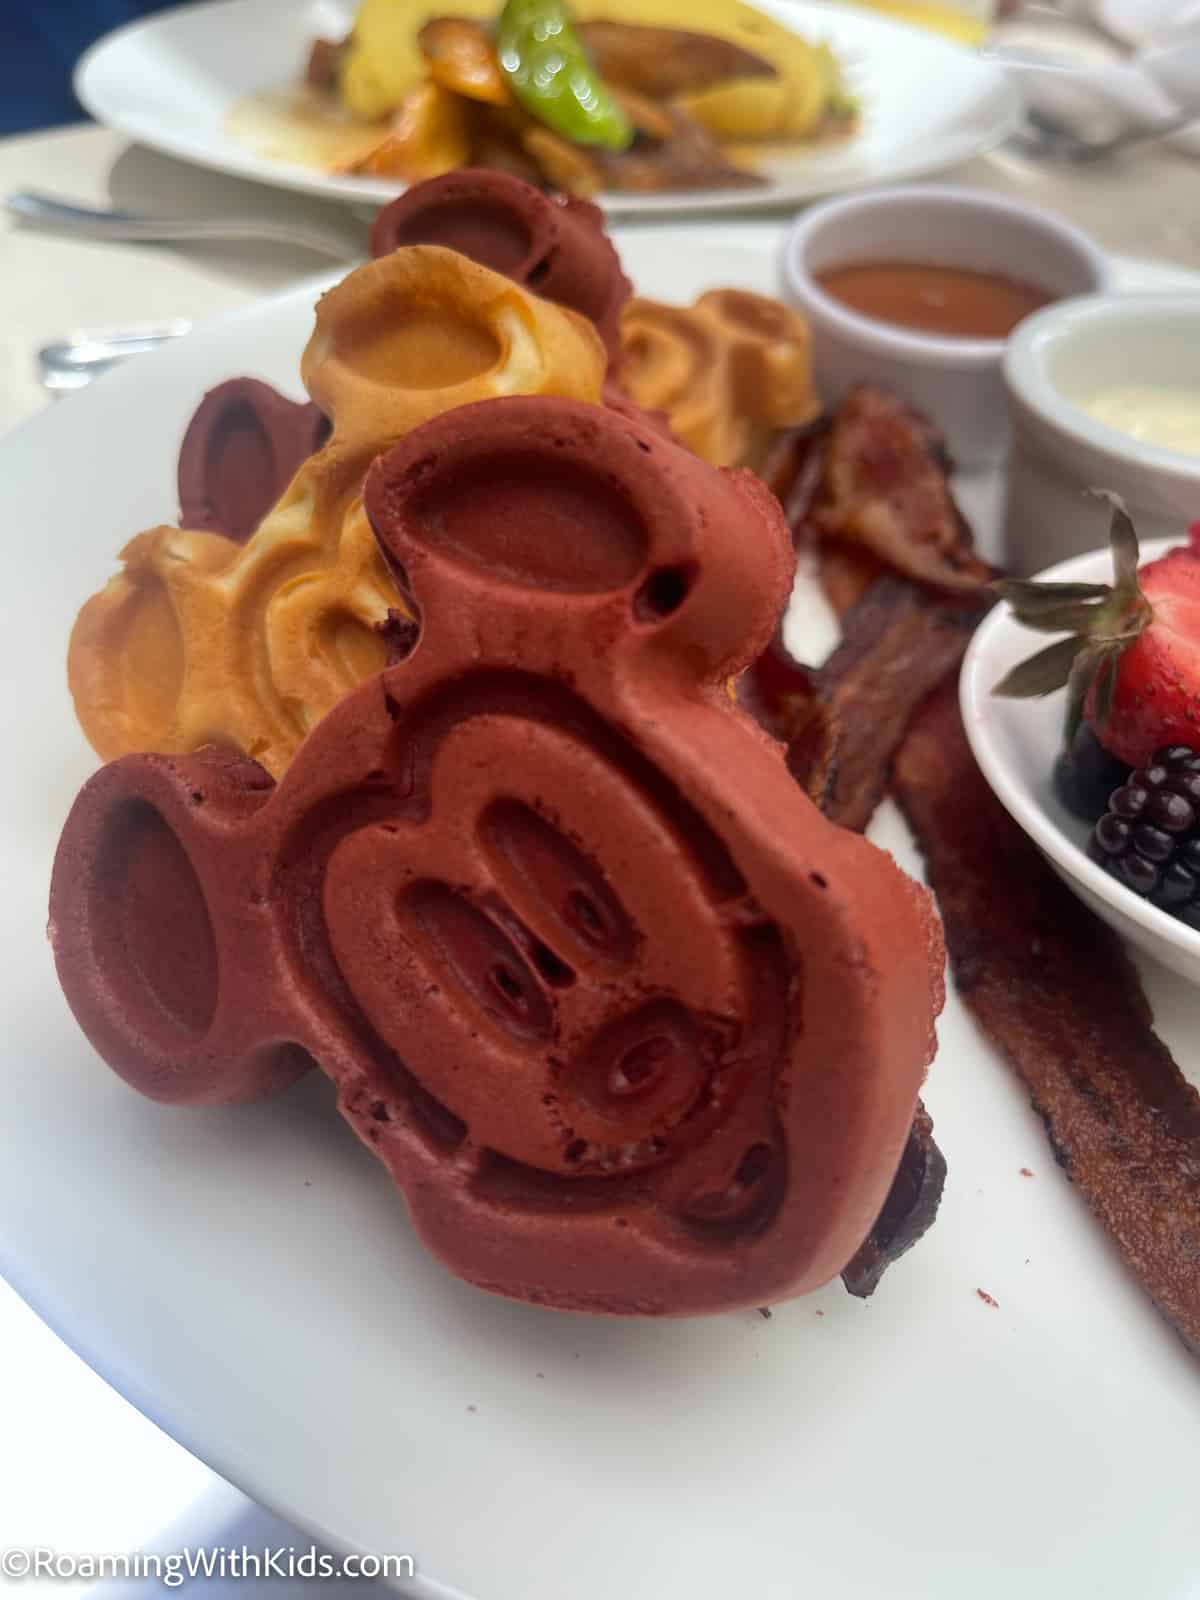 Mickey waffles and minnie waffles with bacon and fruit at the Disney Aulani resort character breakfast